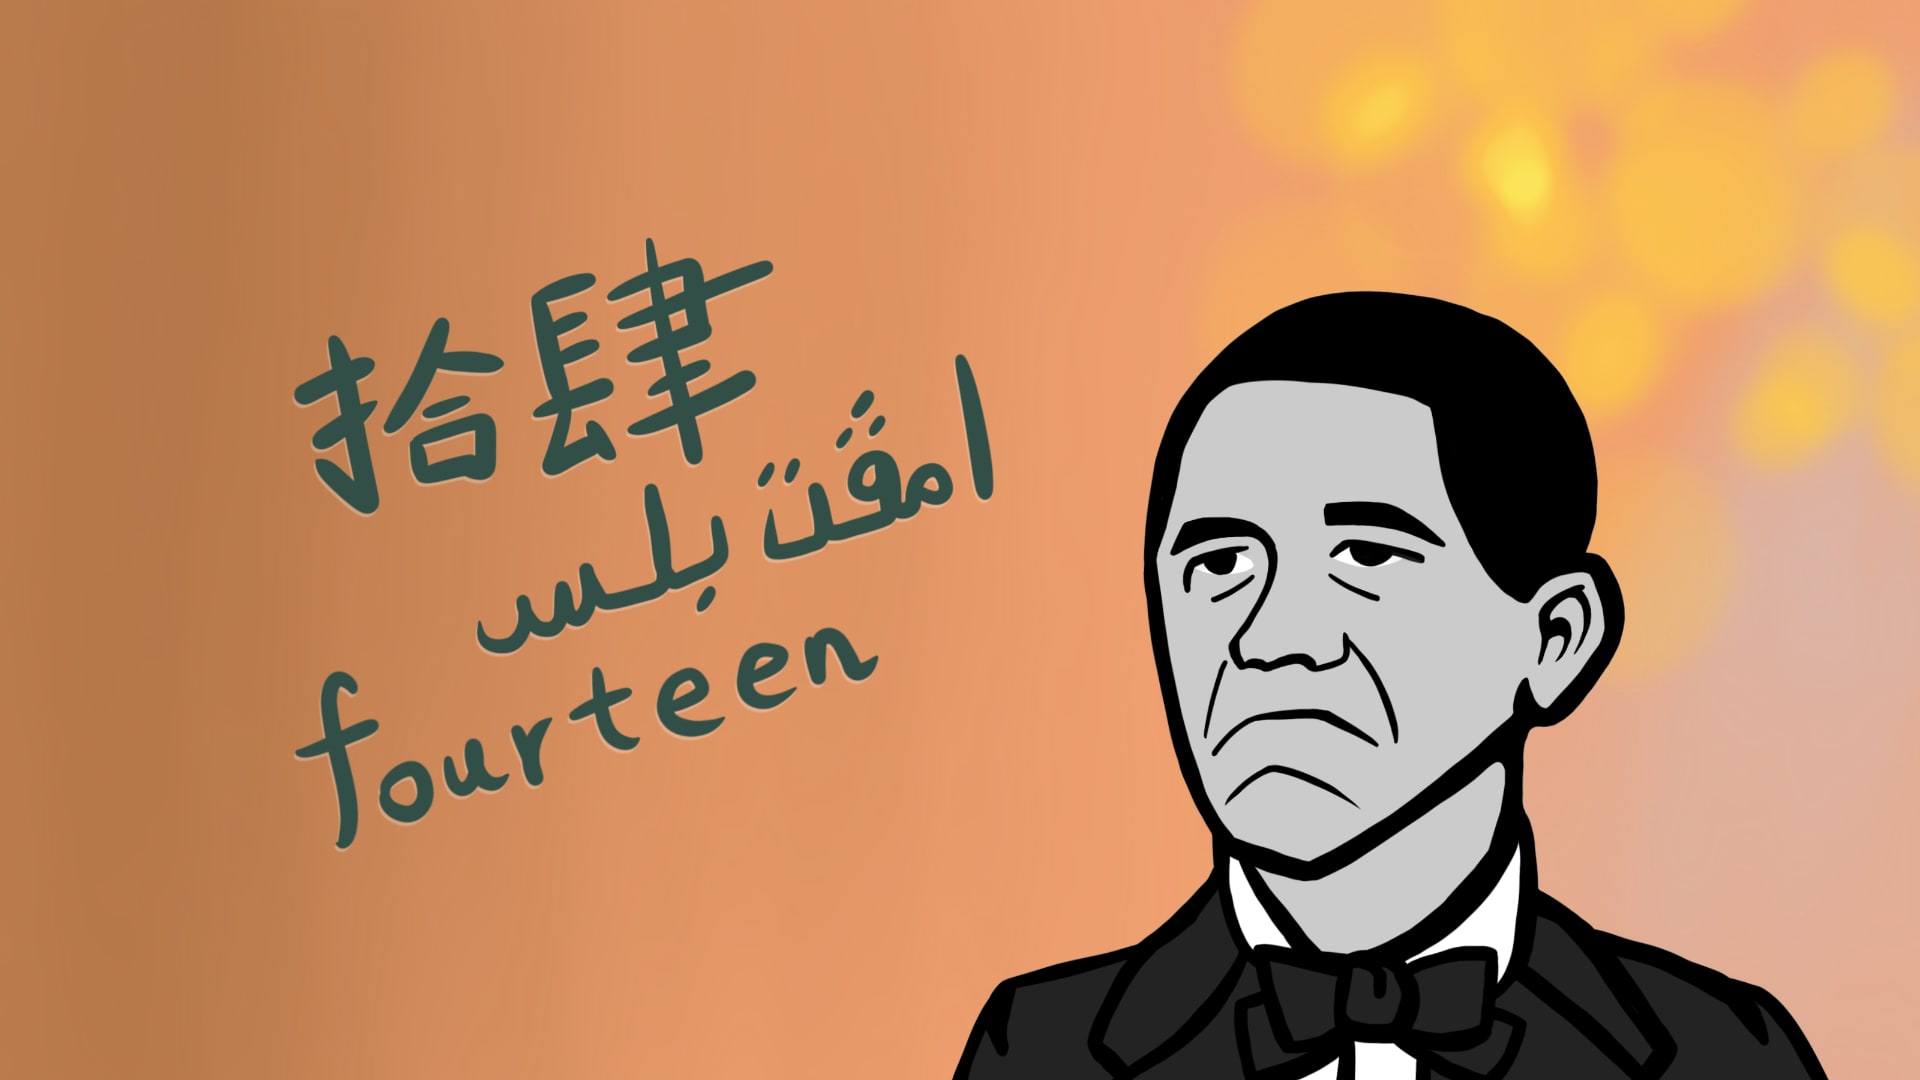 A doodle of the not bad internet meme with the word fourteen in Chinese, Malay, and English on the left.